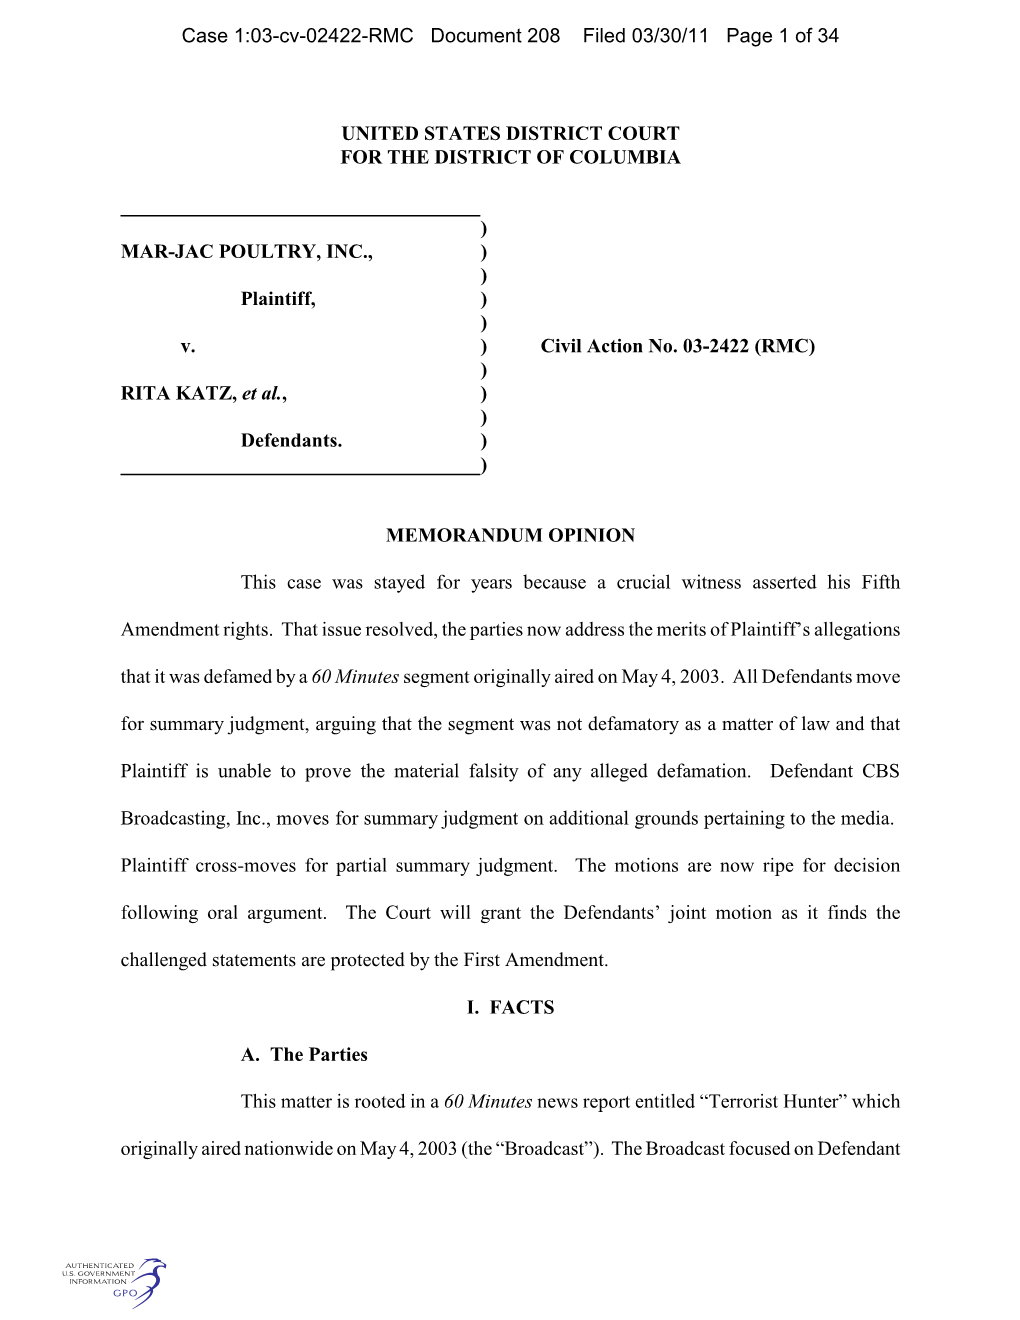 Case 1:03-Cv-02422-RMC Document 208 Filed 03/30/11 Page 1 of 34